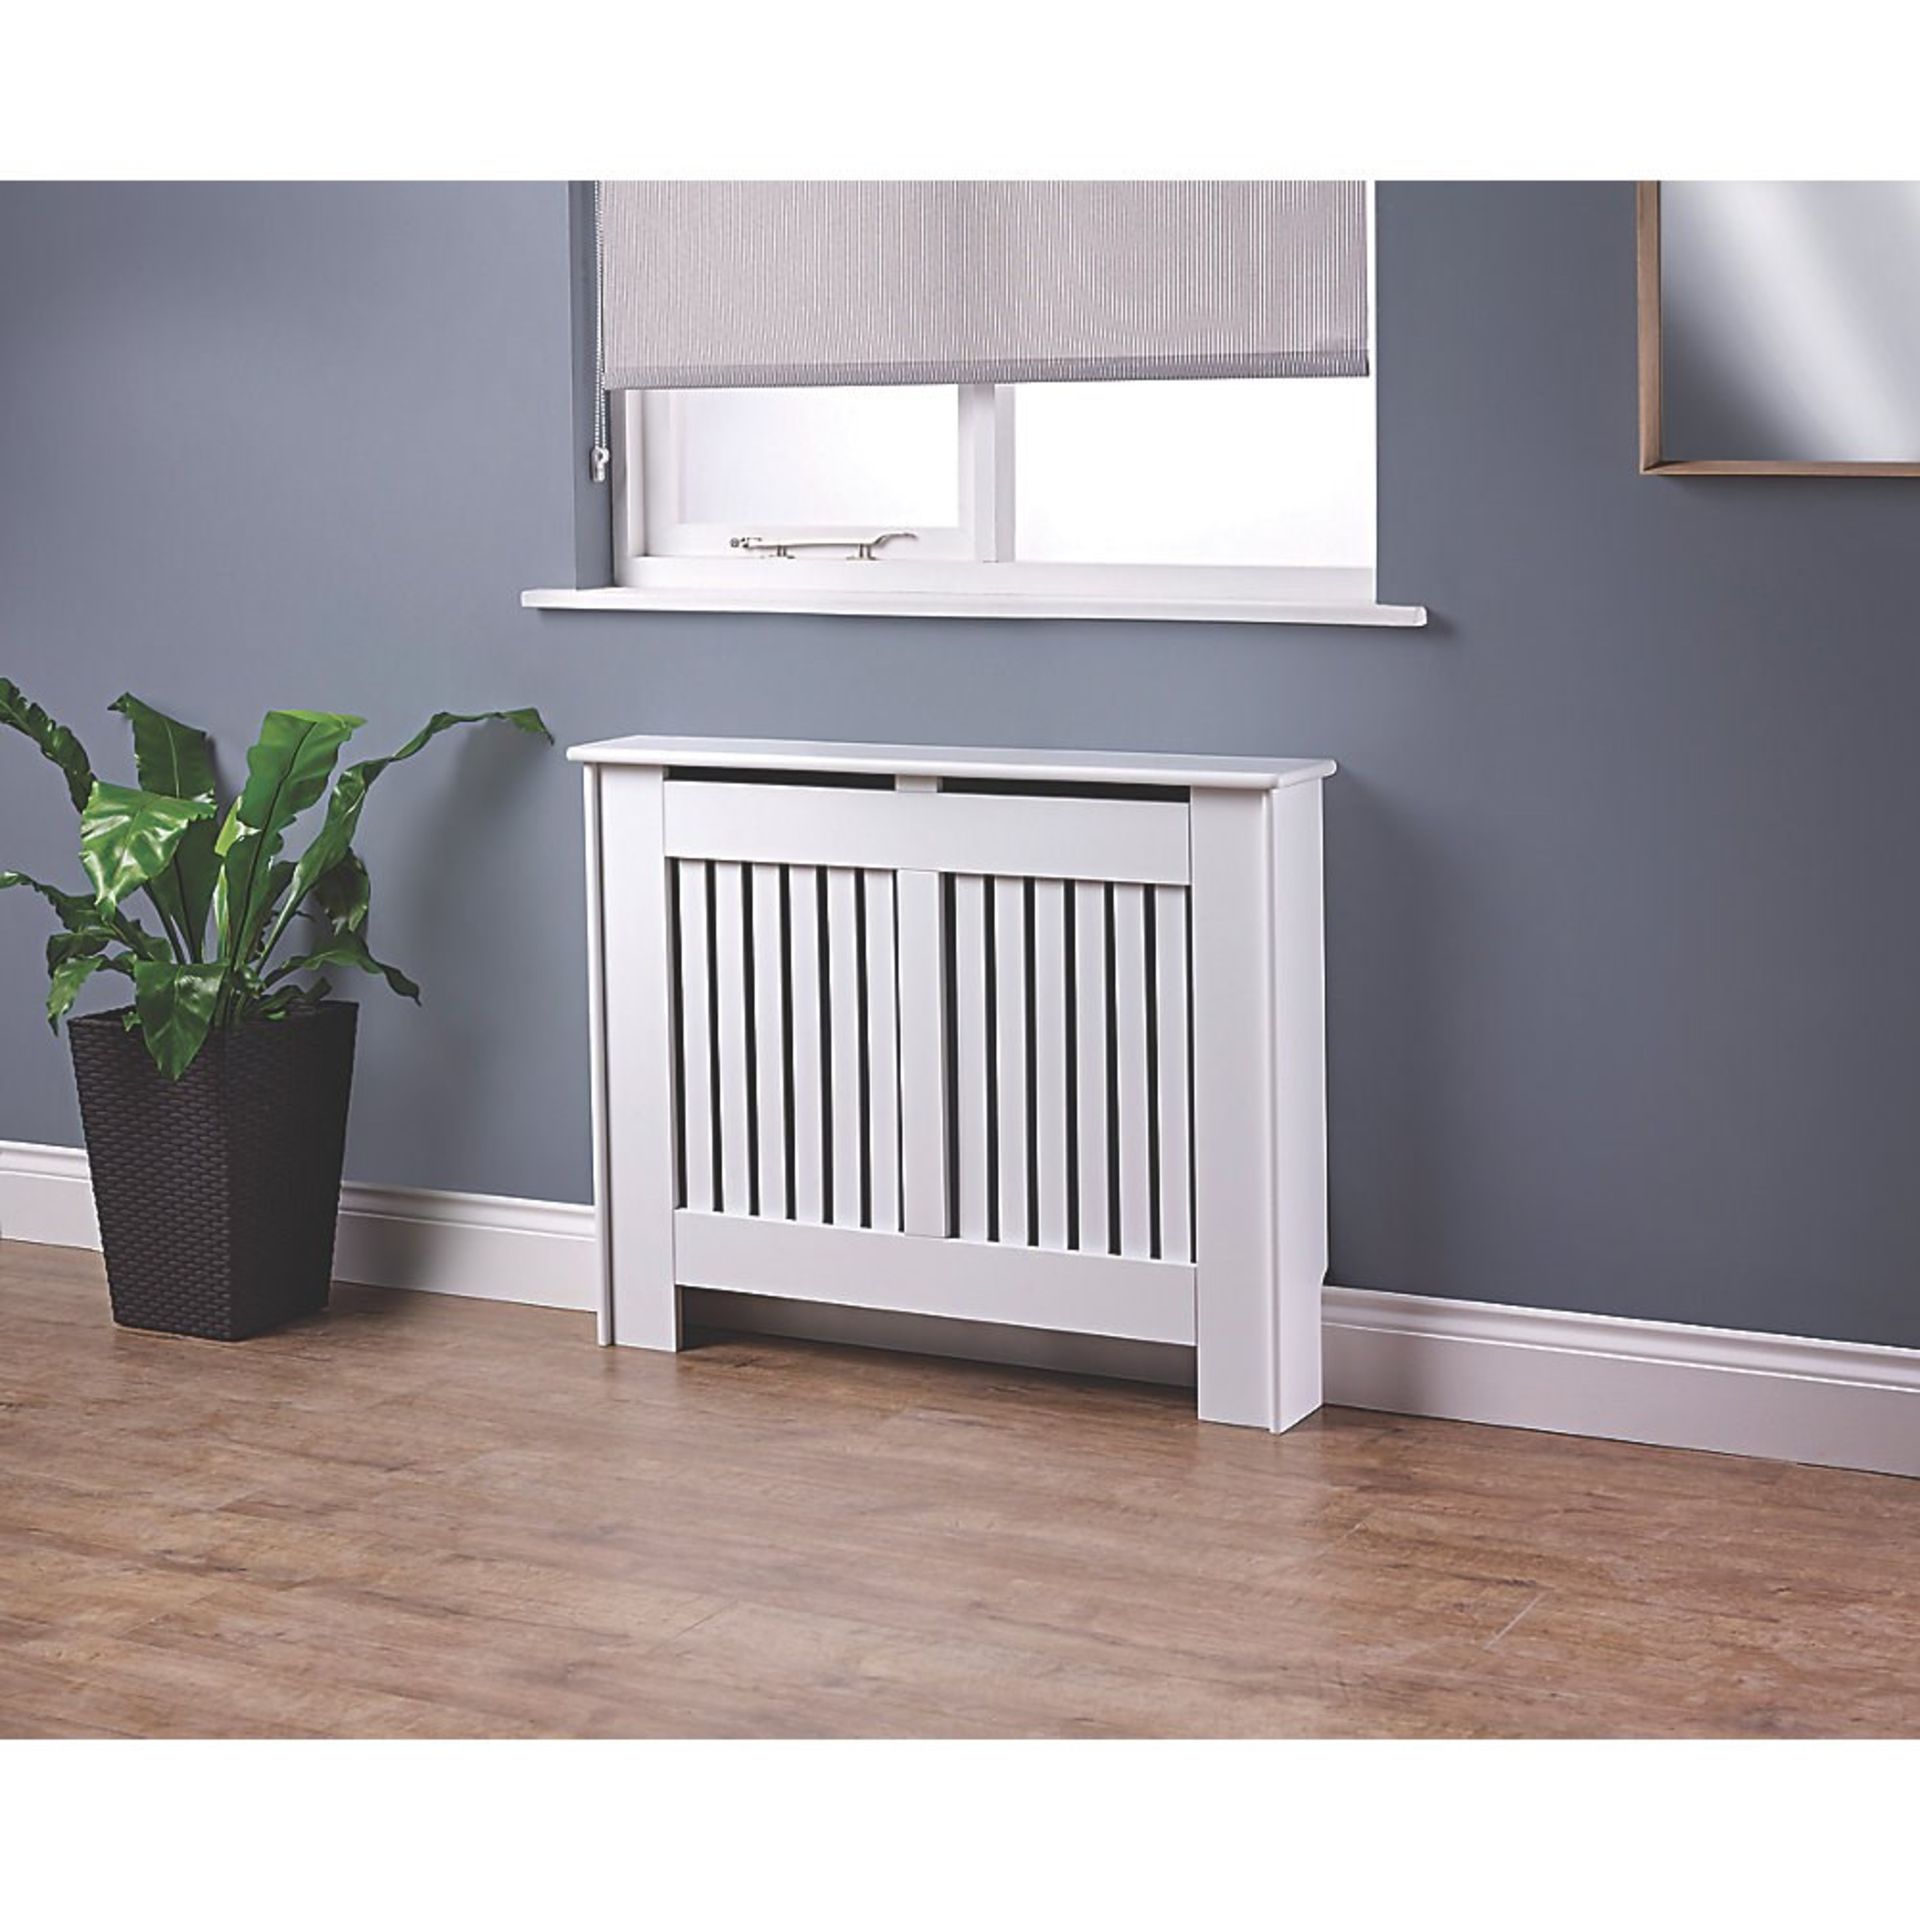 (JL69) 1020 X 180 X 800MM CONTEMPORARY KENSINGTON RADIATOR CABINET SMALL WHITE . Ideal for conc... - Image 3 of 3